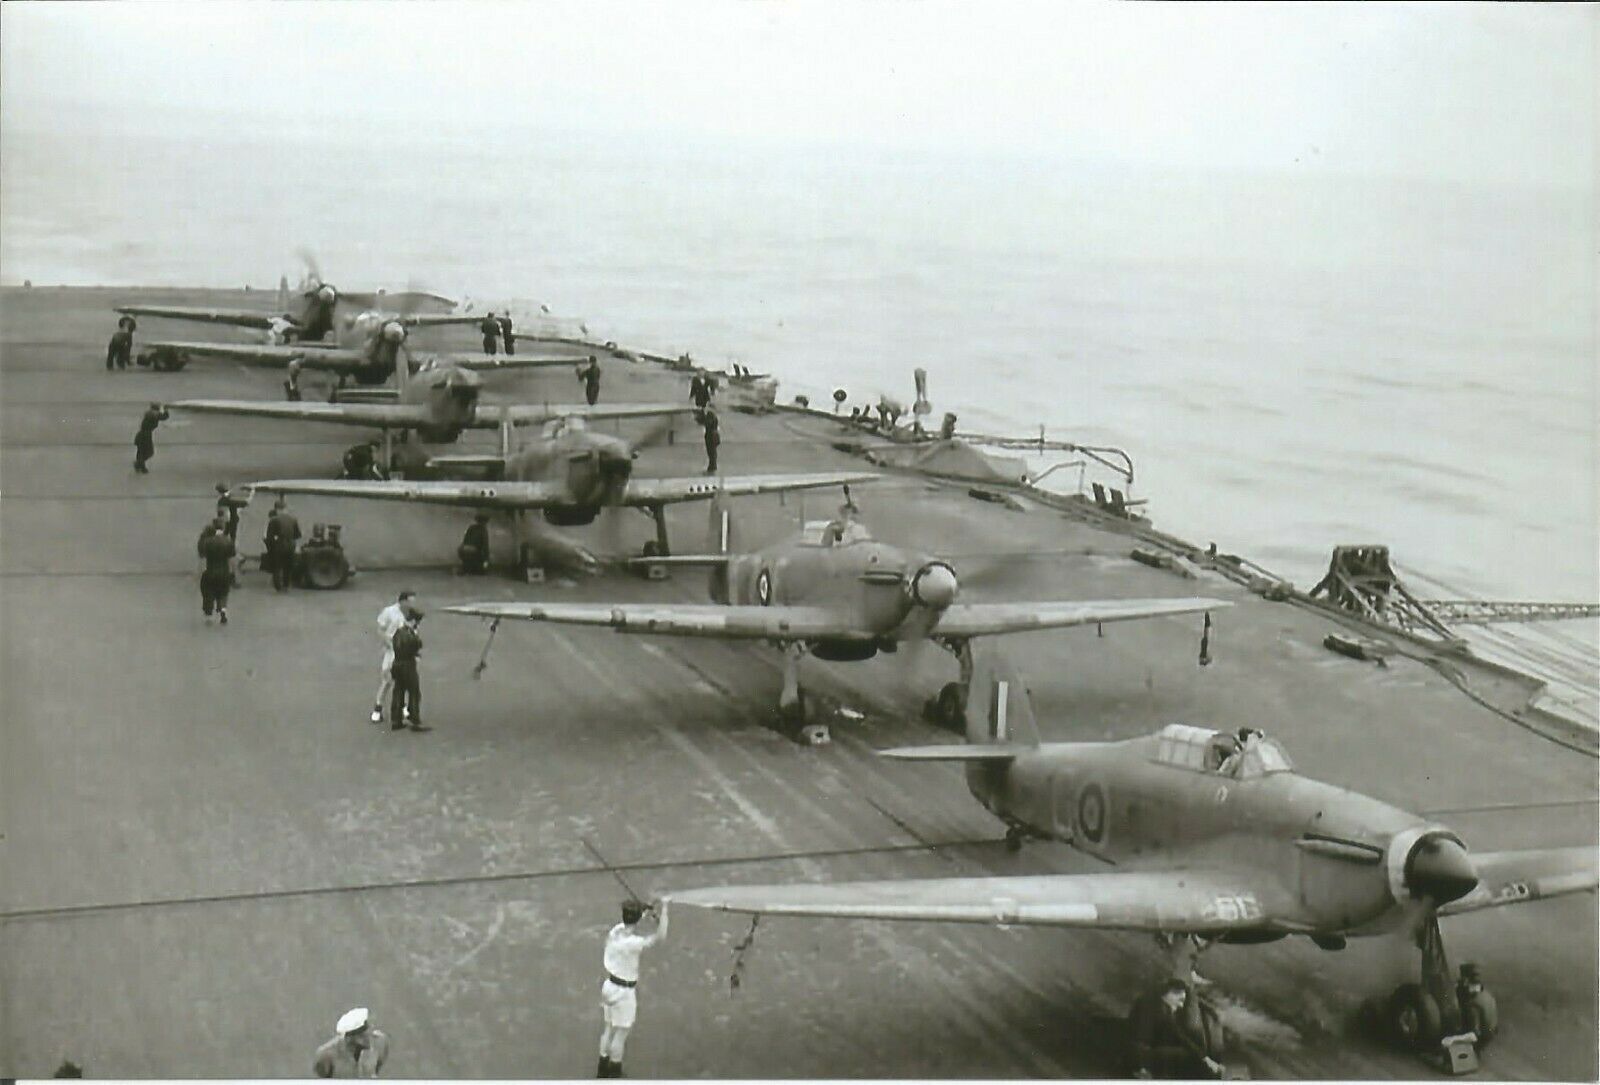 British Hawker Sea Hurricanes on Deck of Aircraft Carrier  WW2 4x6 Re-Print